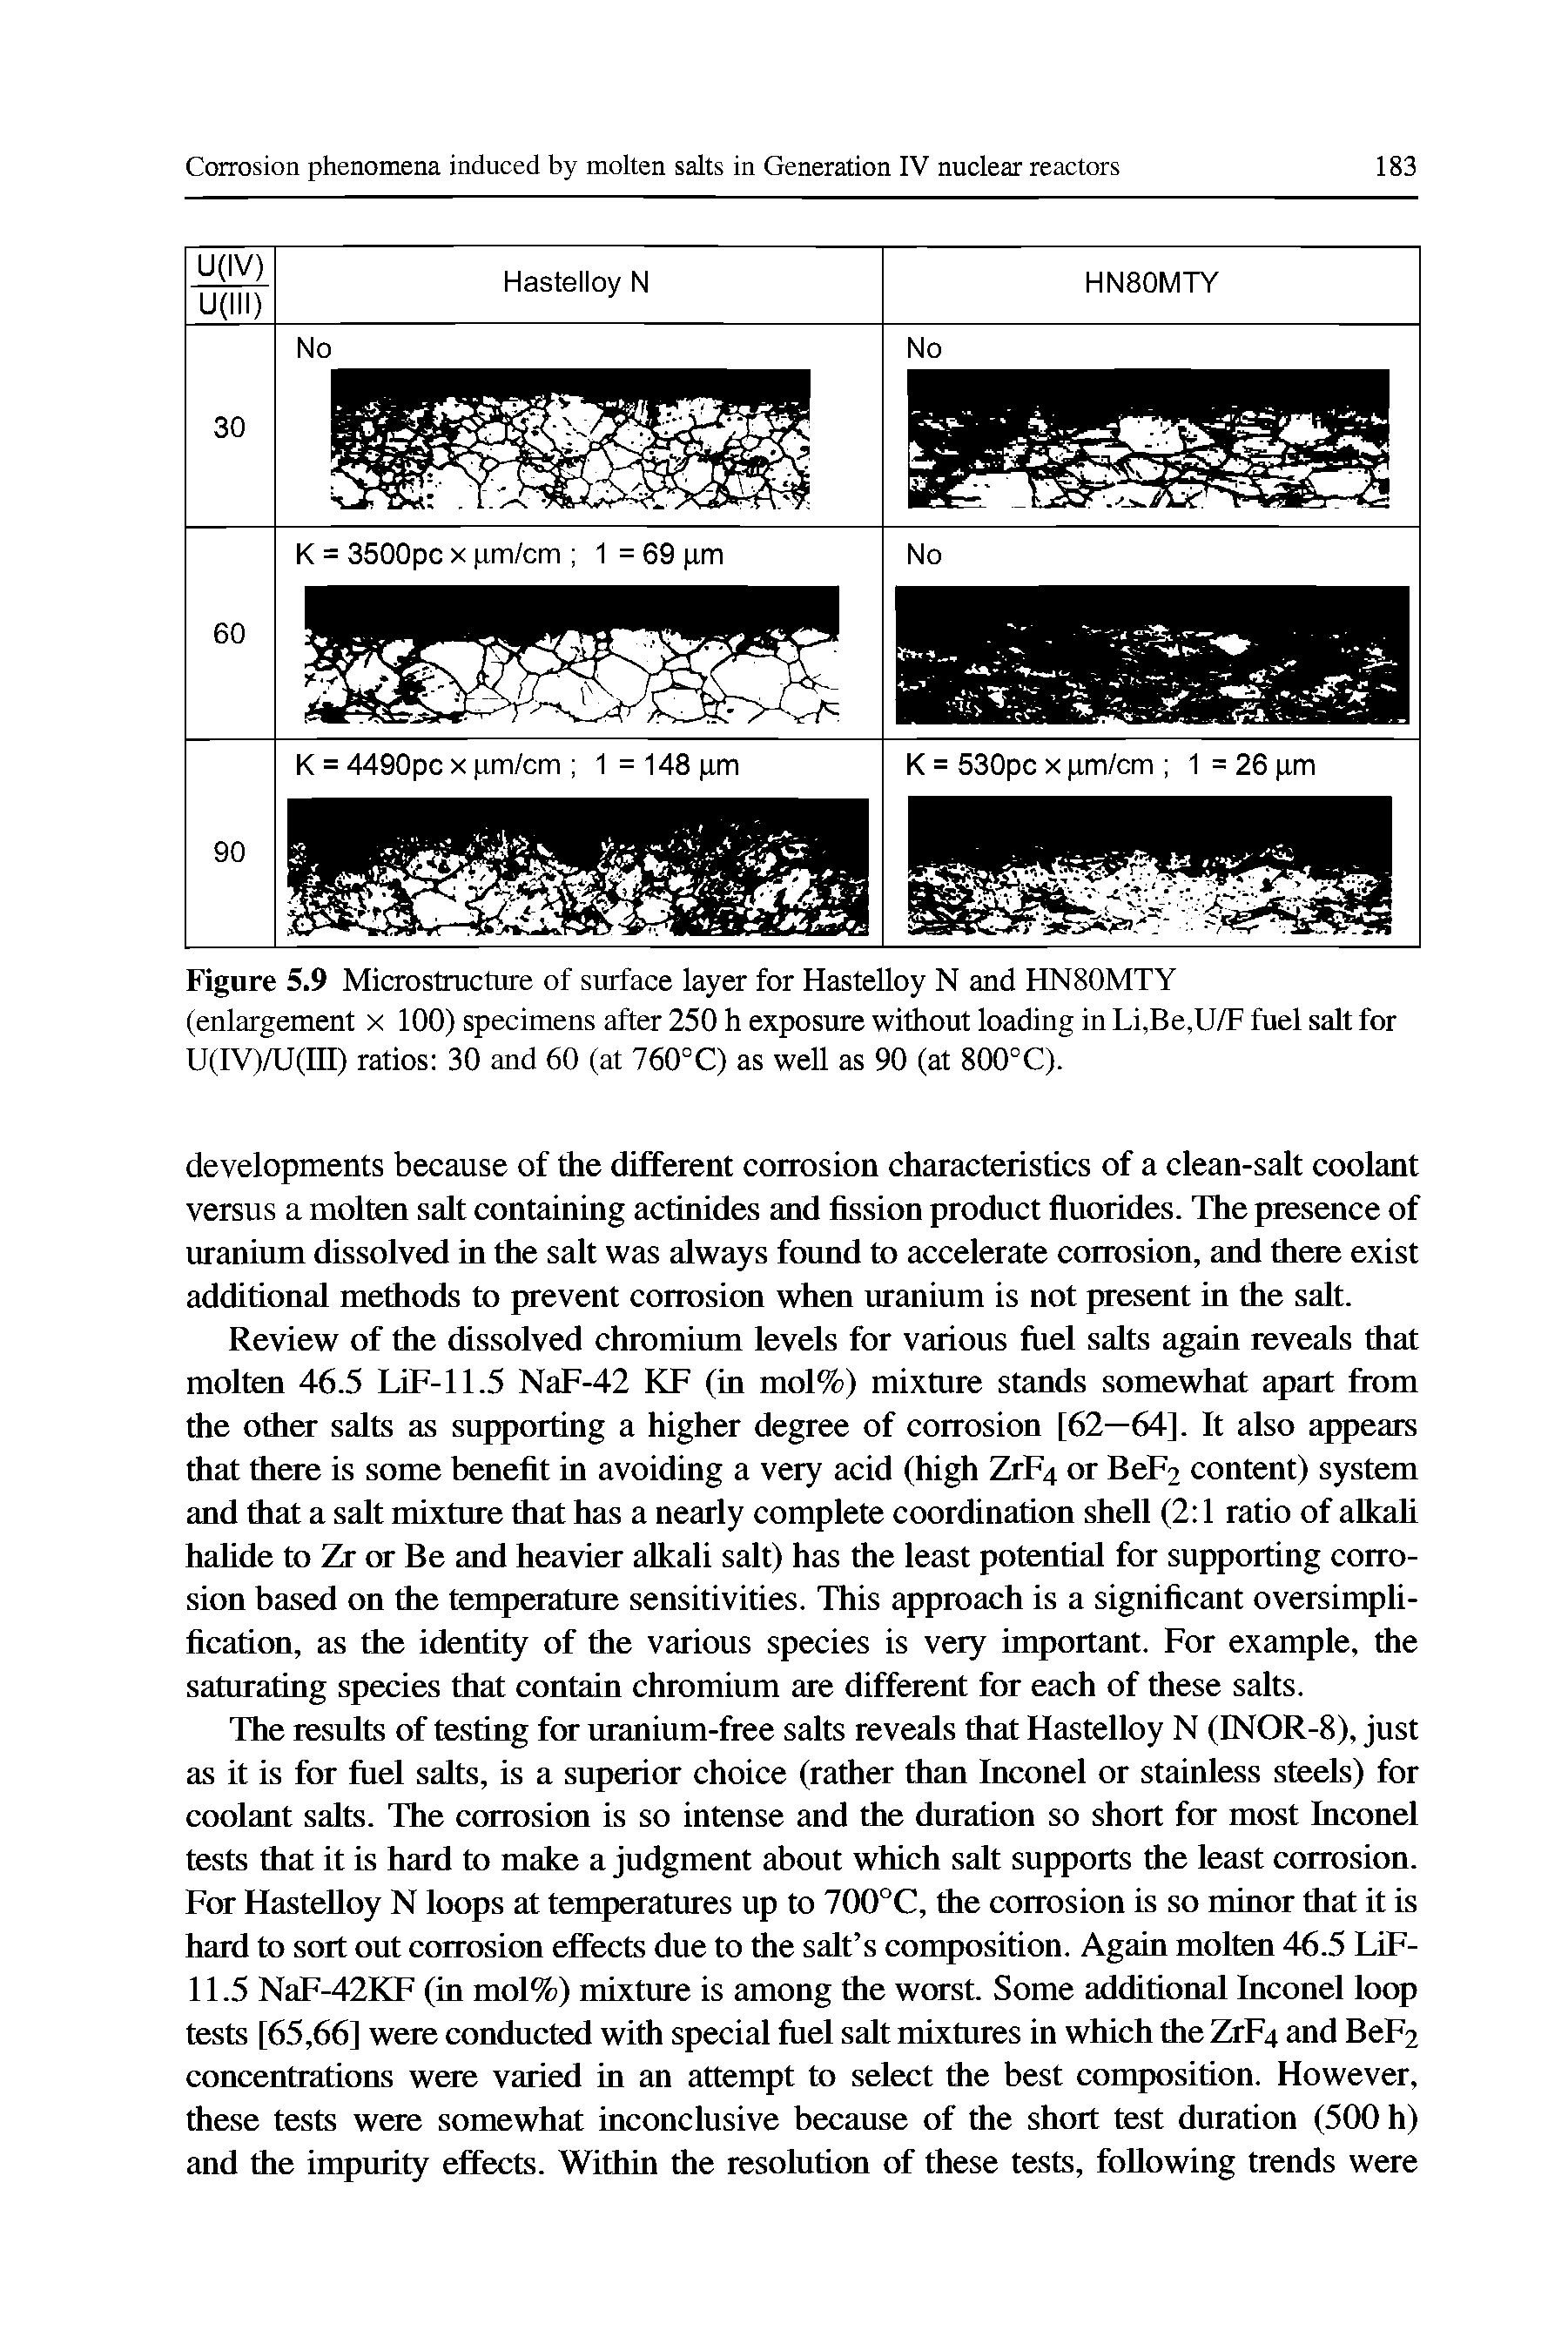 Figure 5.9 Microstructure of surface layer for Hastelloy N and HN80MTY (enlargement x 100) specimens after 250 h exposure without loading in Li,Be,U/F fuel salt for U(IV)/U(ni) ratios 30 and 60 (at 760°C) as well as 90 (at 800°C).